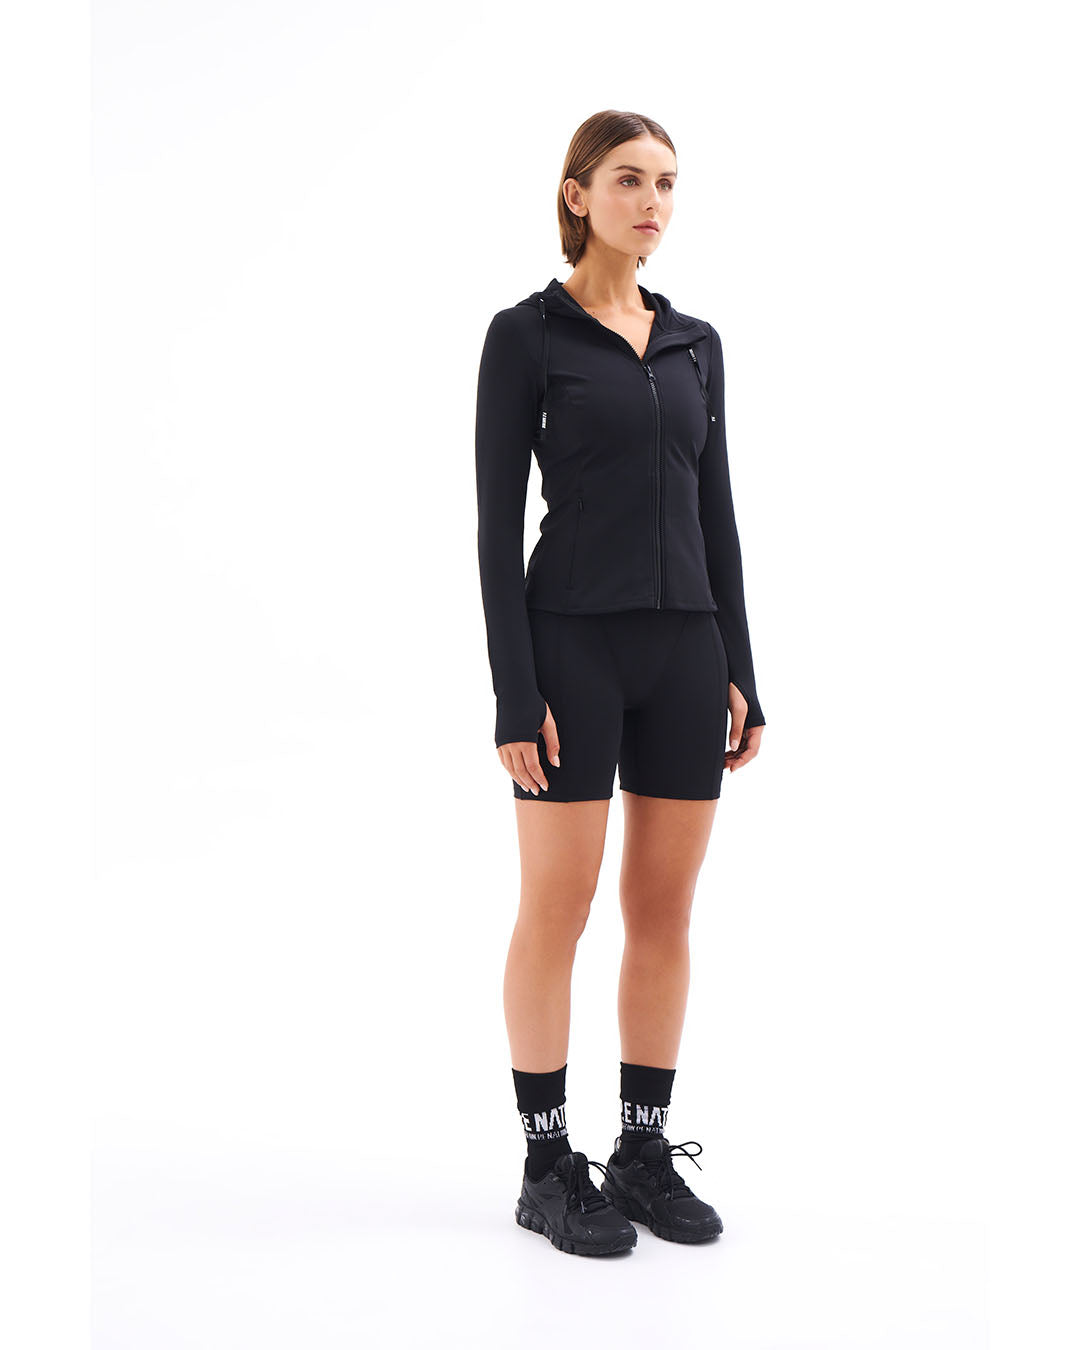 Agility Test Jacket in Black Jackets by PE Nation - Prae Store